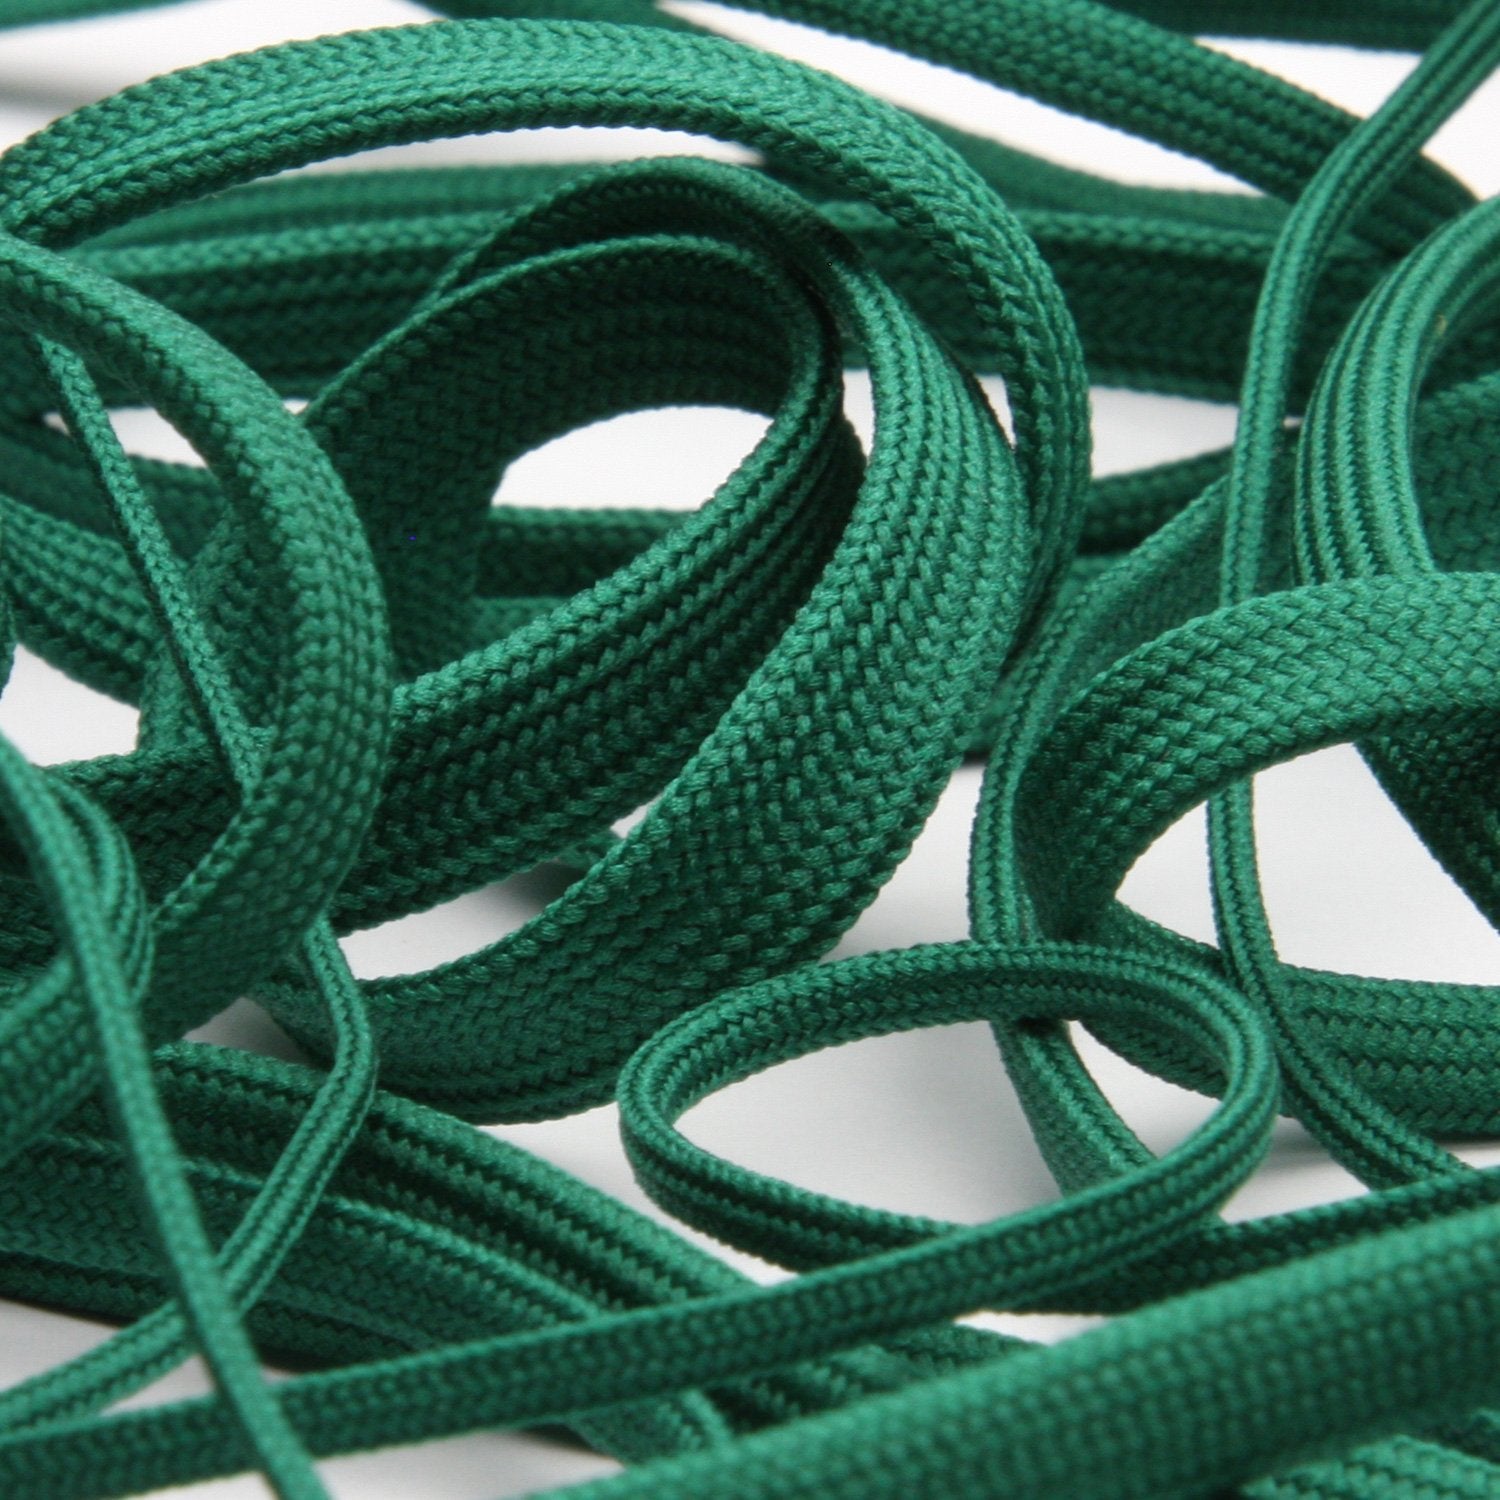 Green 1 mm Movi Waxed Polyester Cord